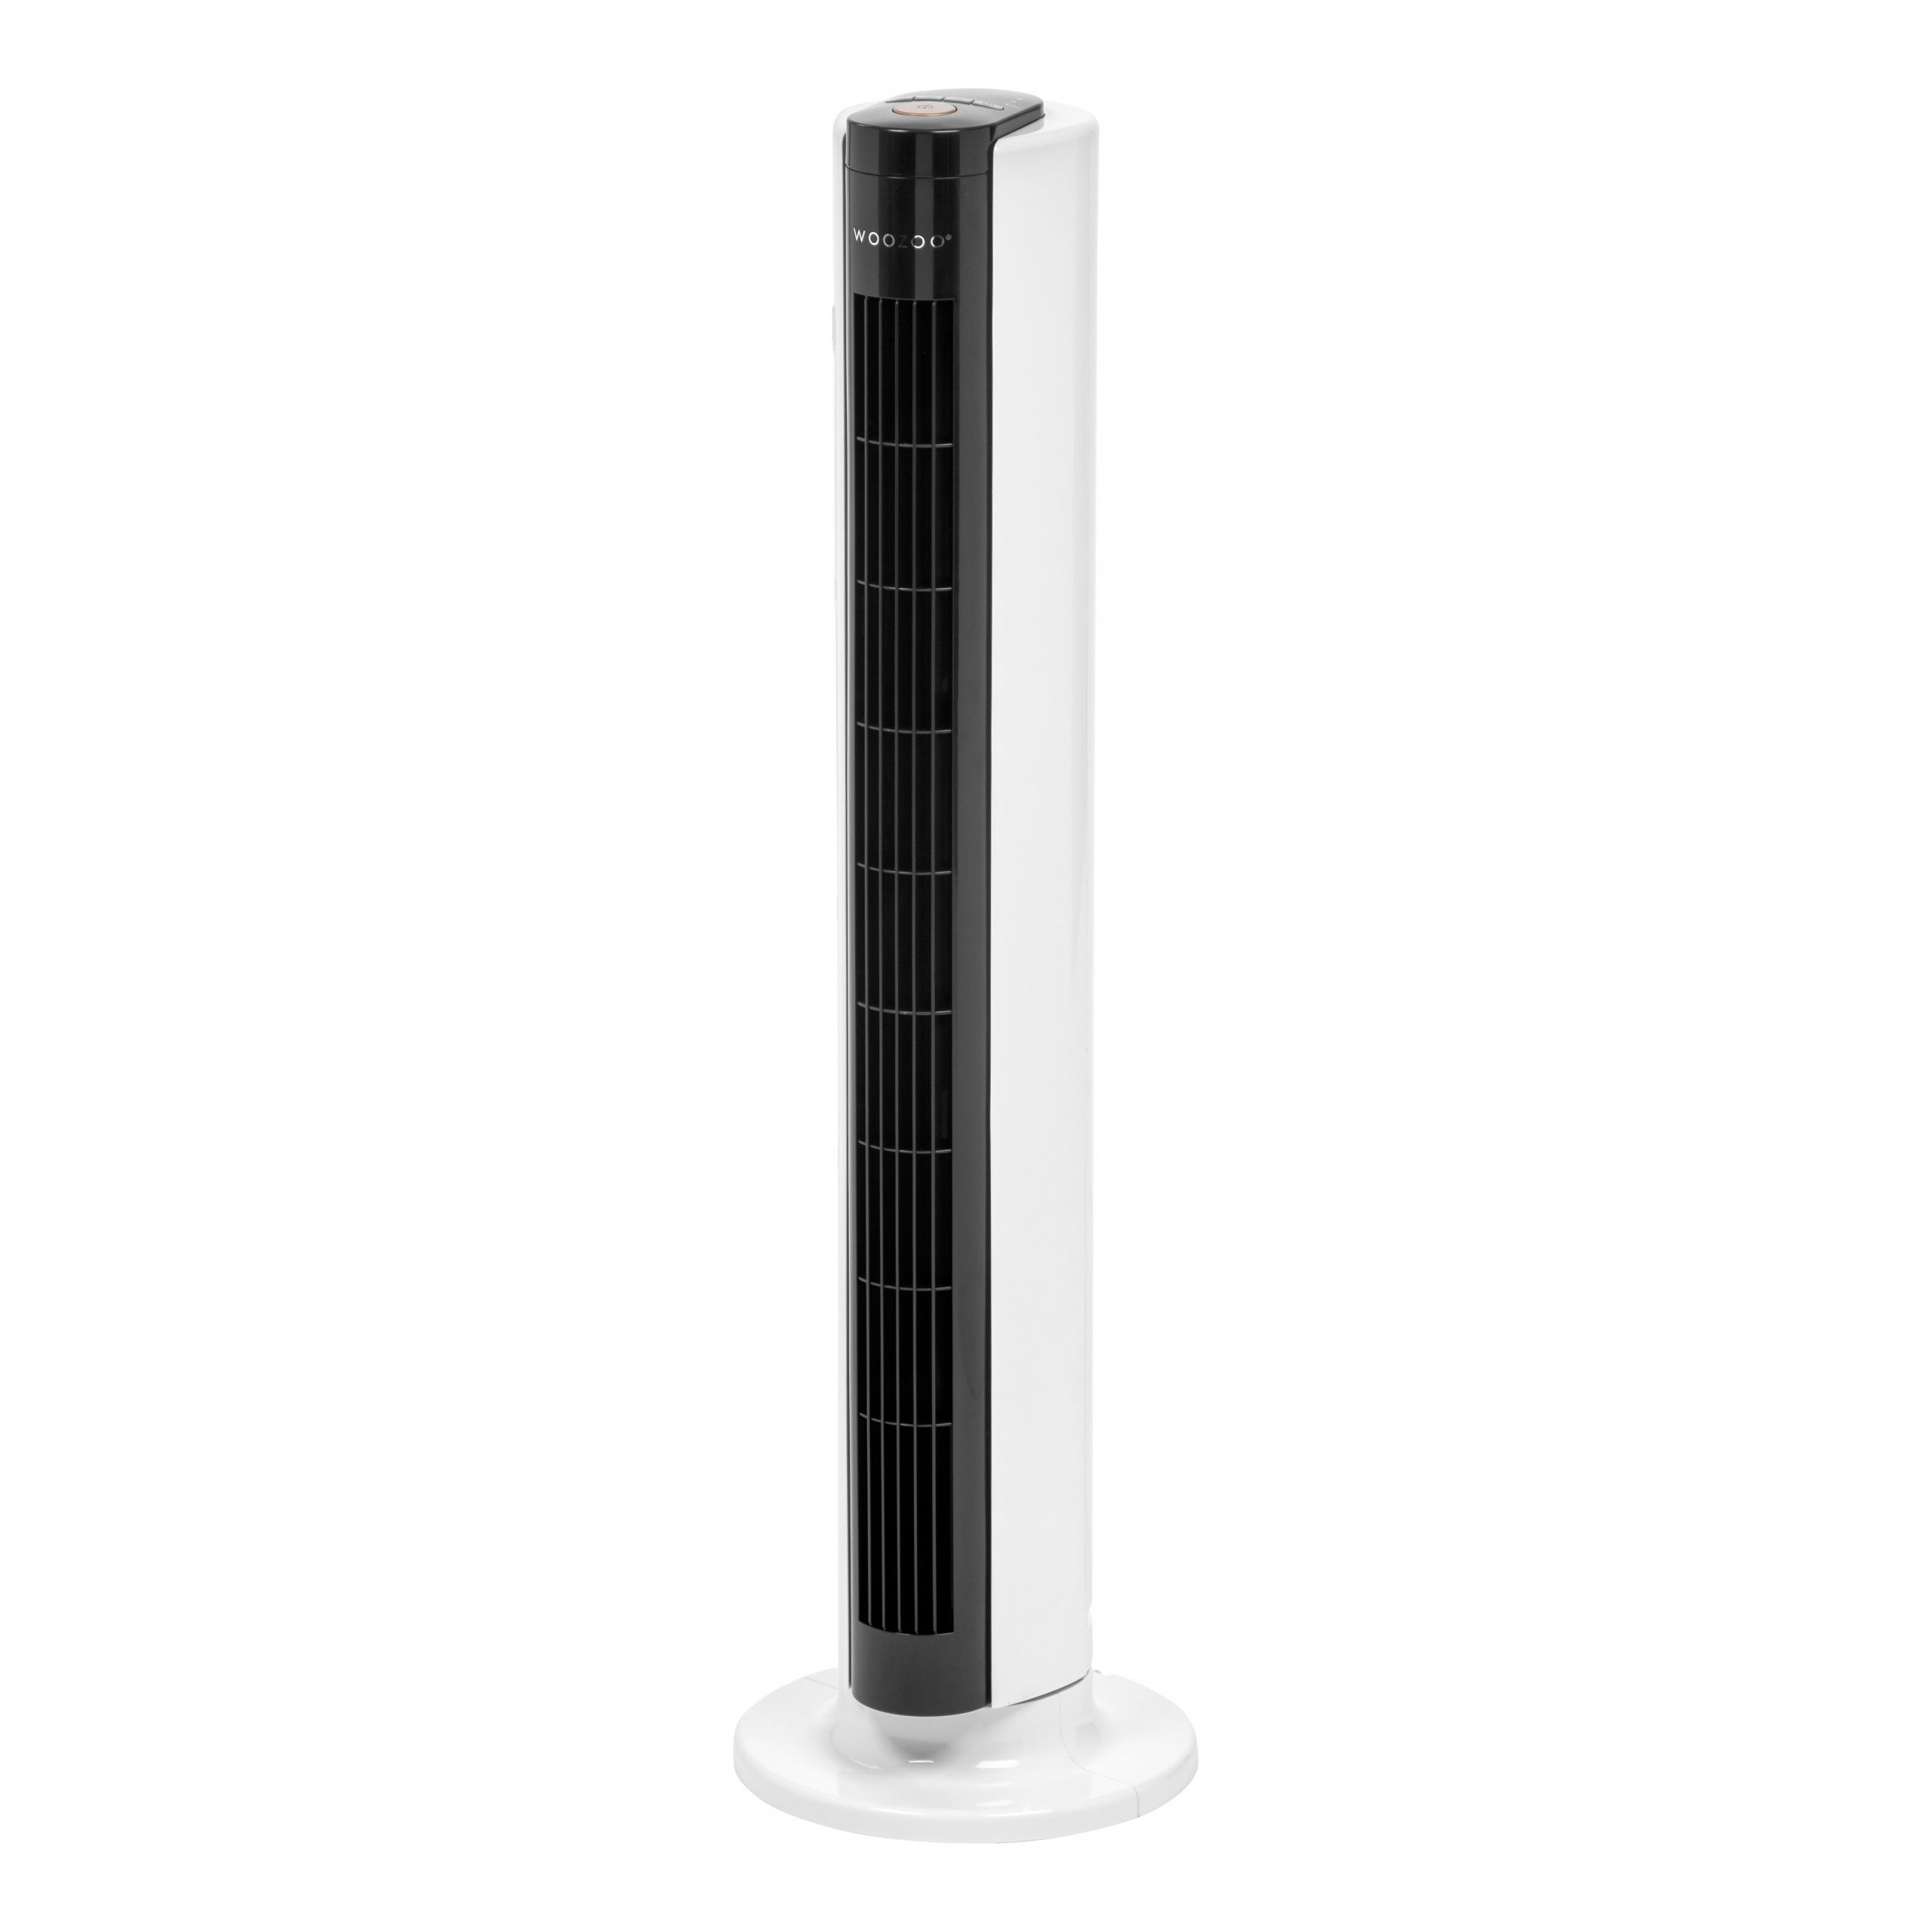 Details About Woozoo 32 Tower Fan Oscillating With Remote And Timer White for measurements 3500 X 3500